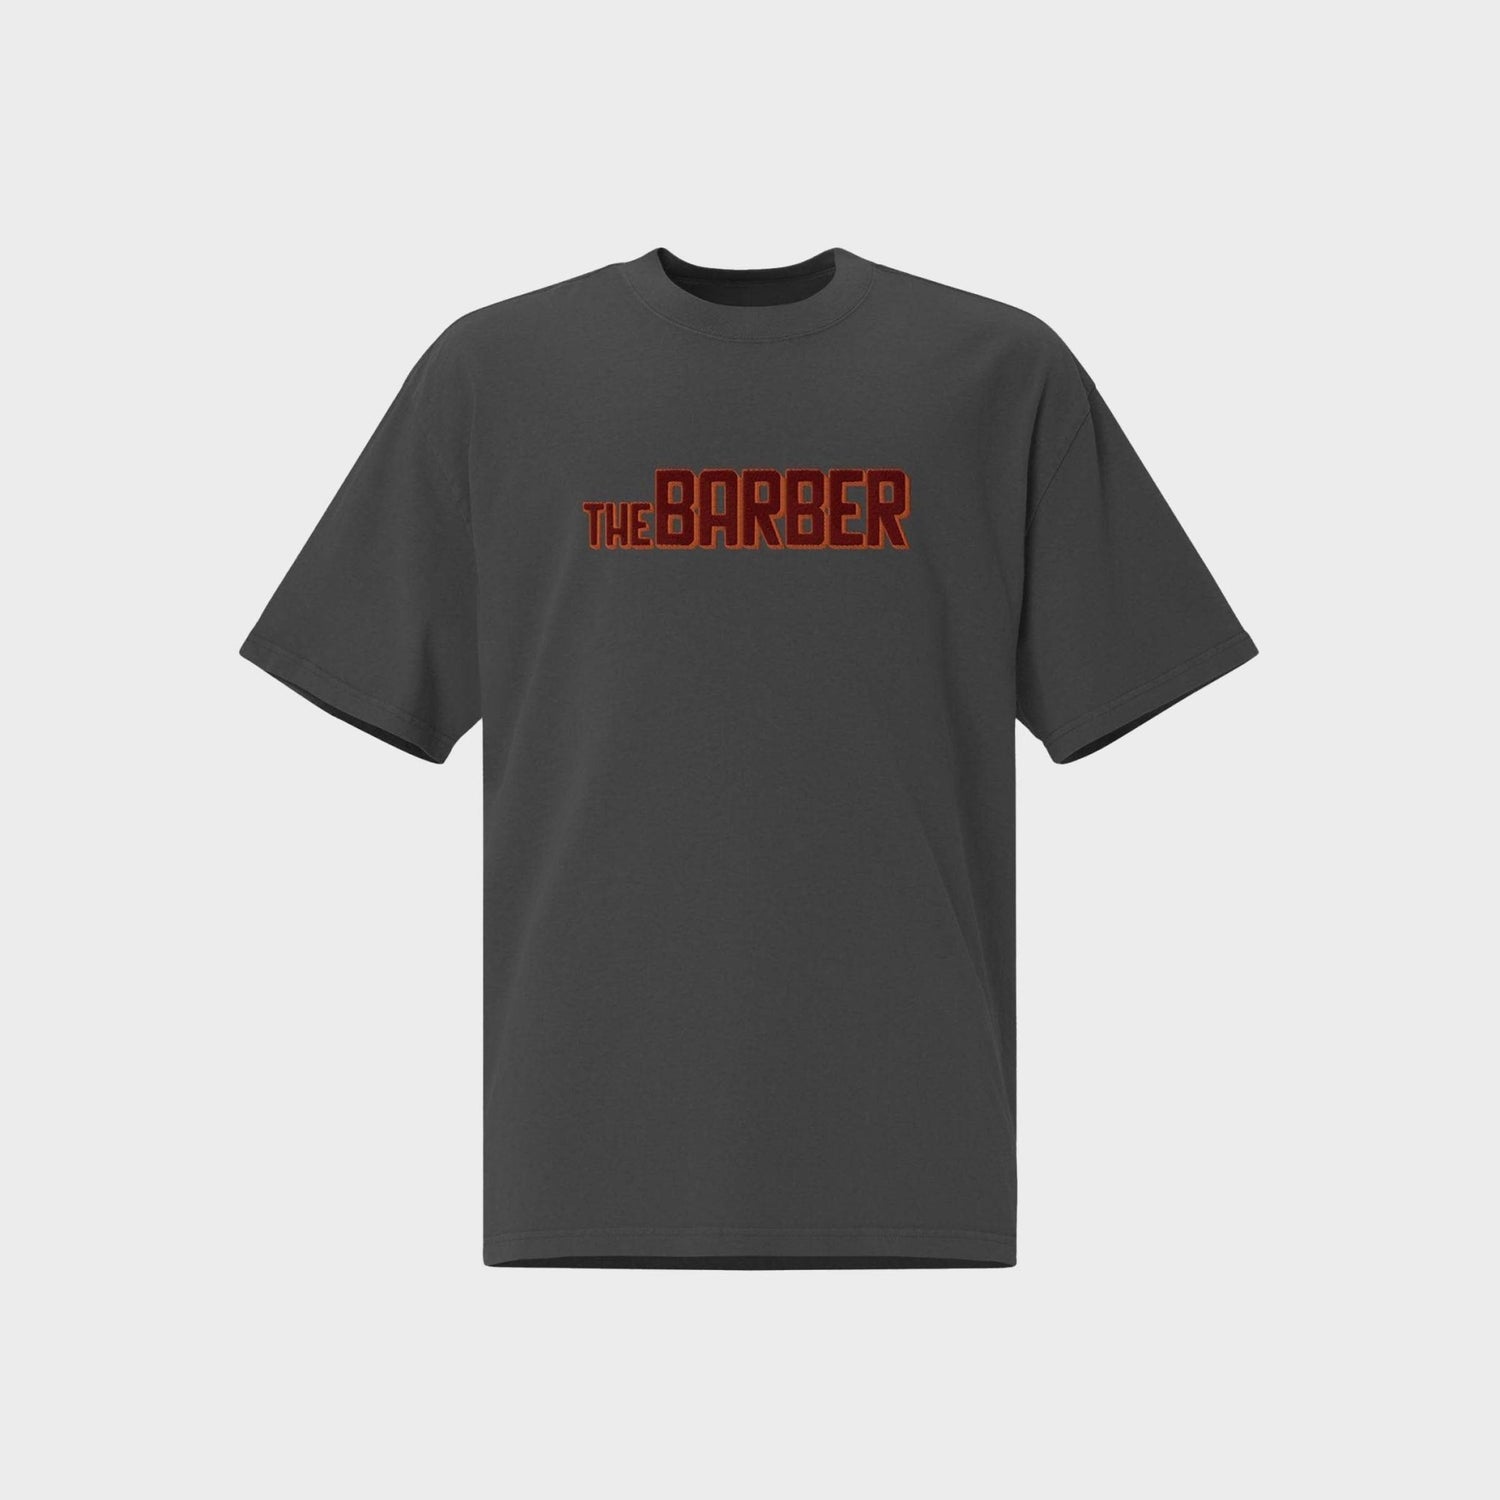 Statement Marron/Red - The Barber Style